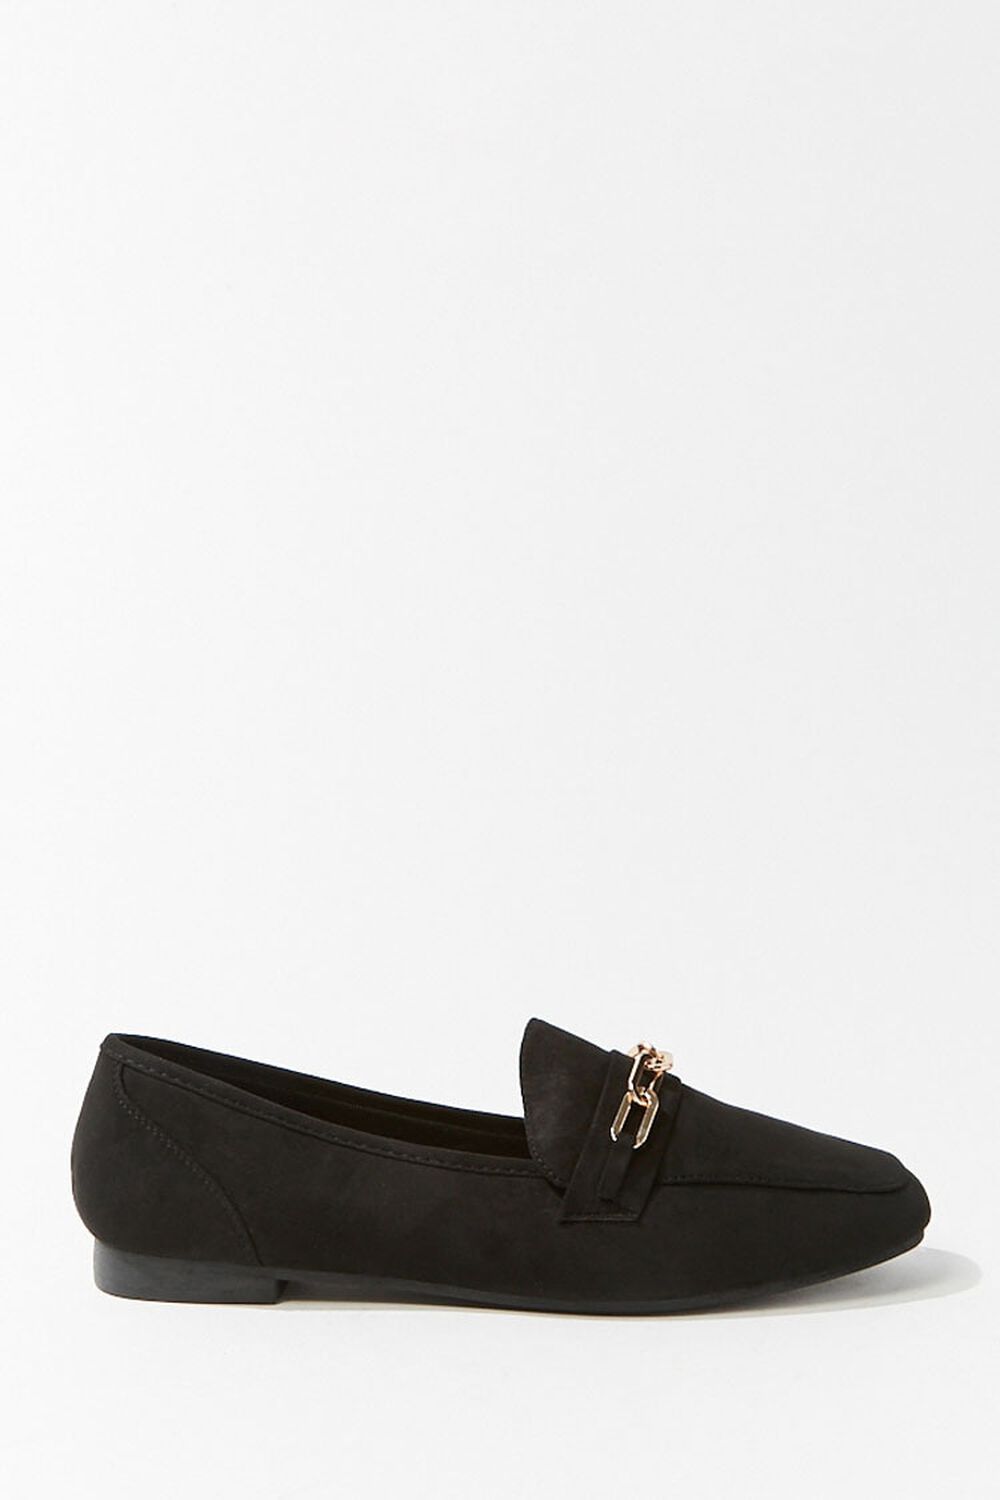 Faux Suede Chain Accent Loafers, image 1